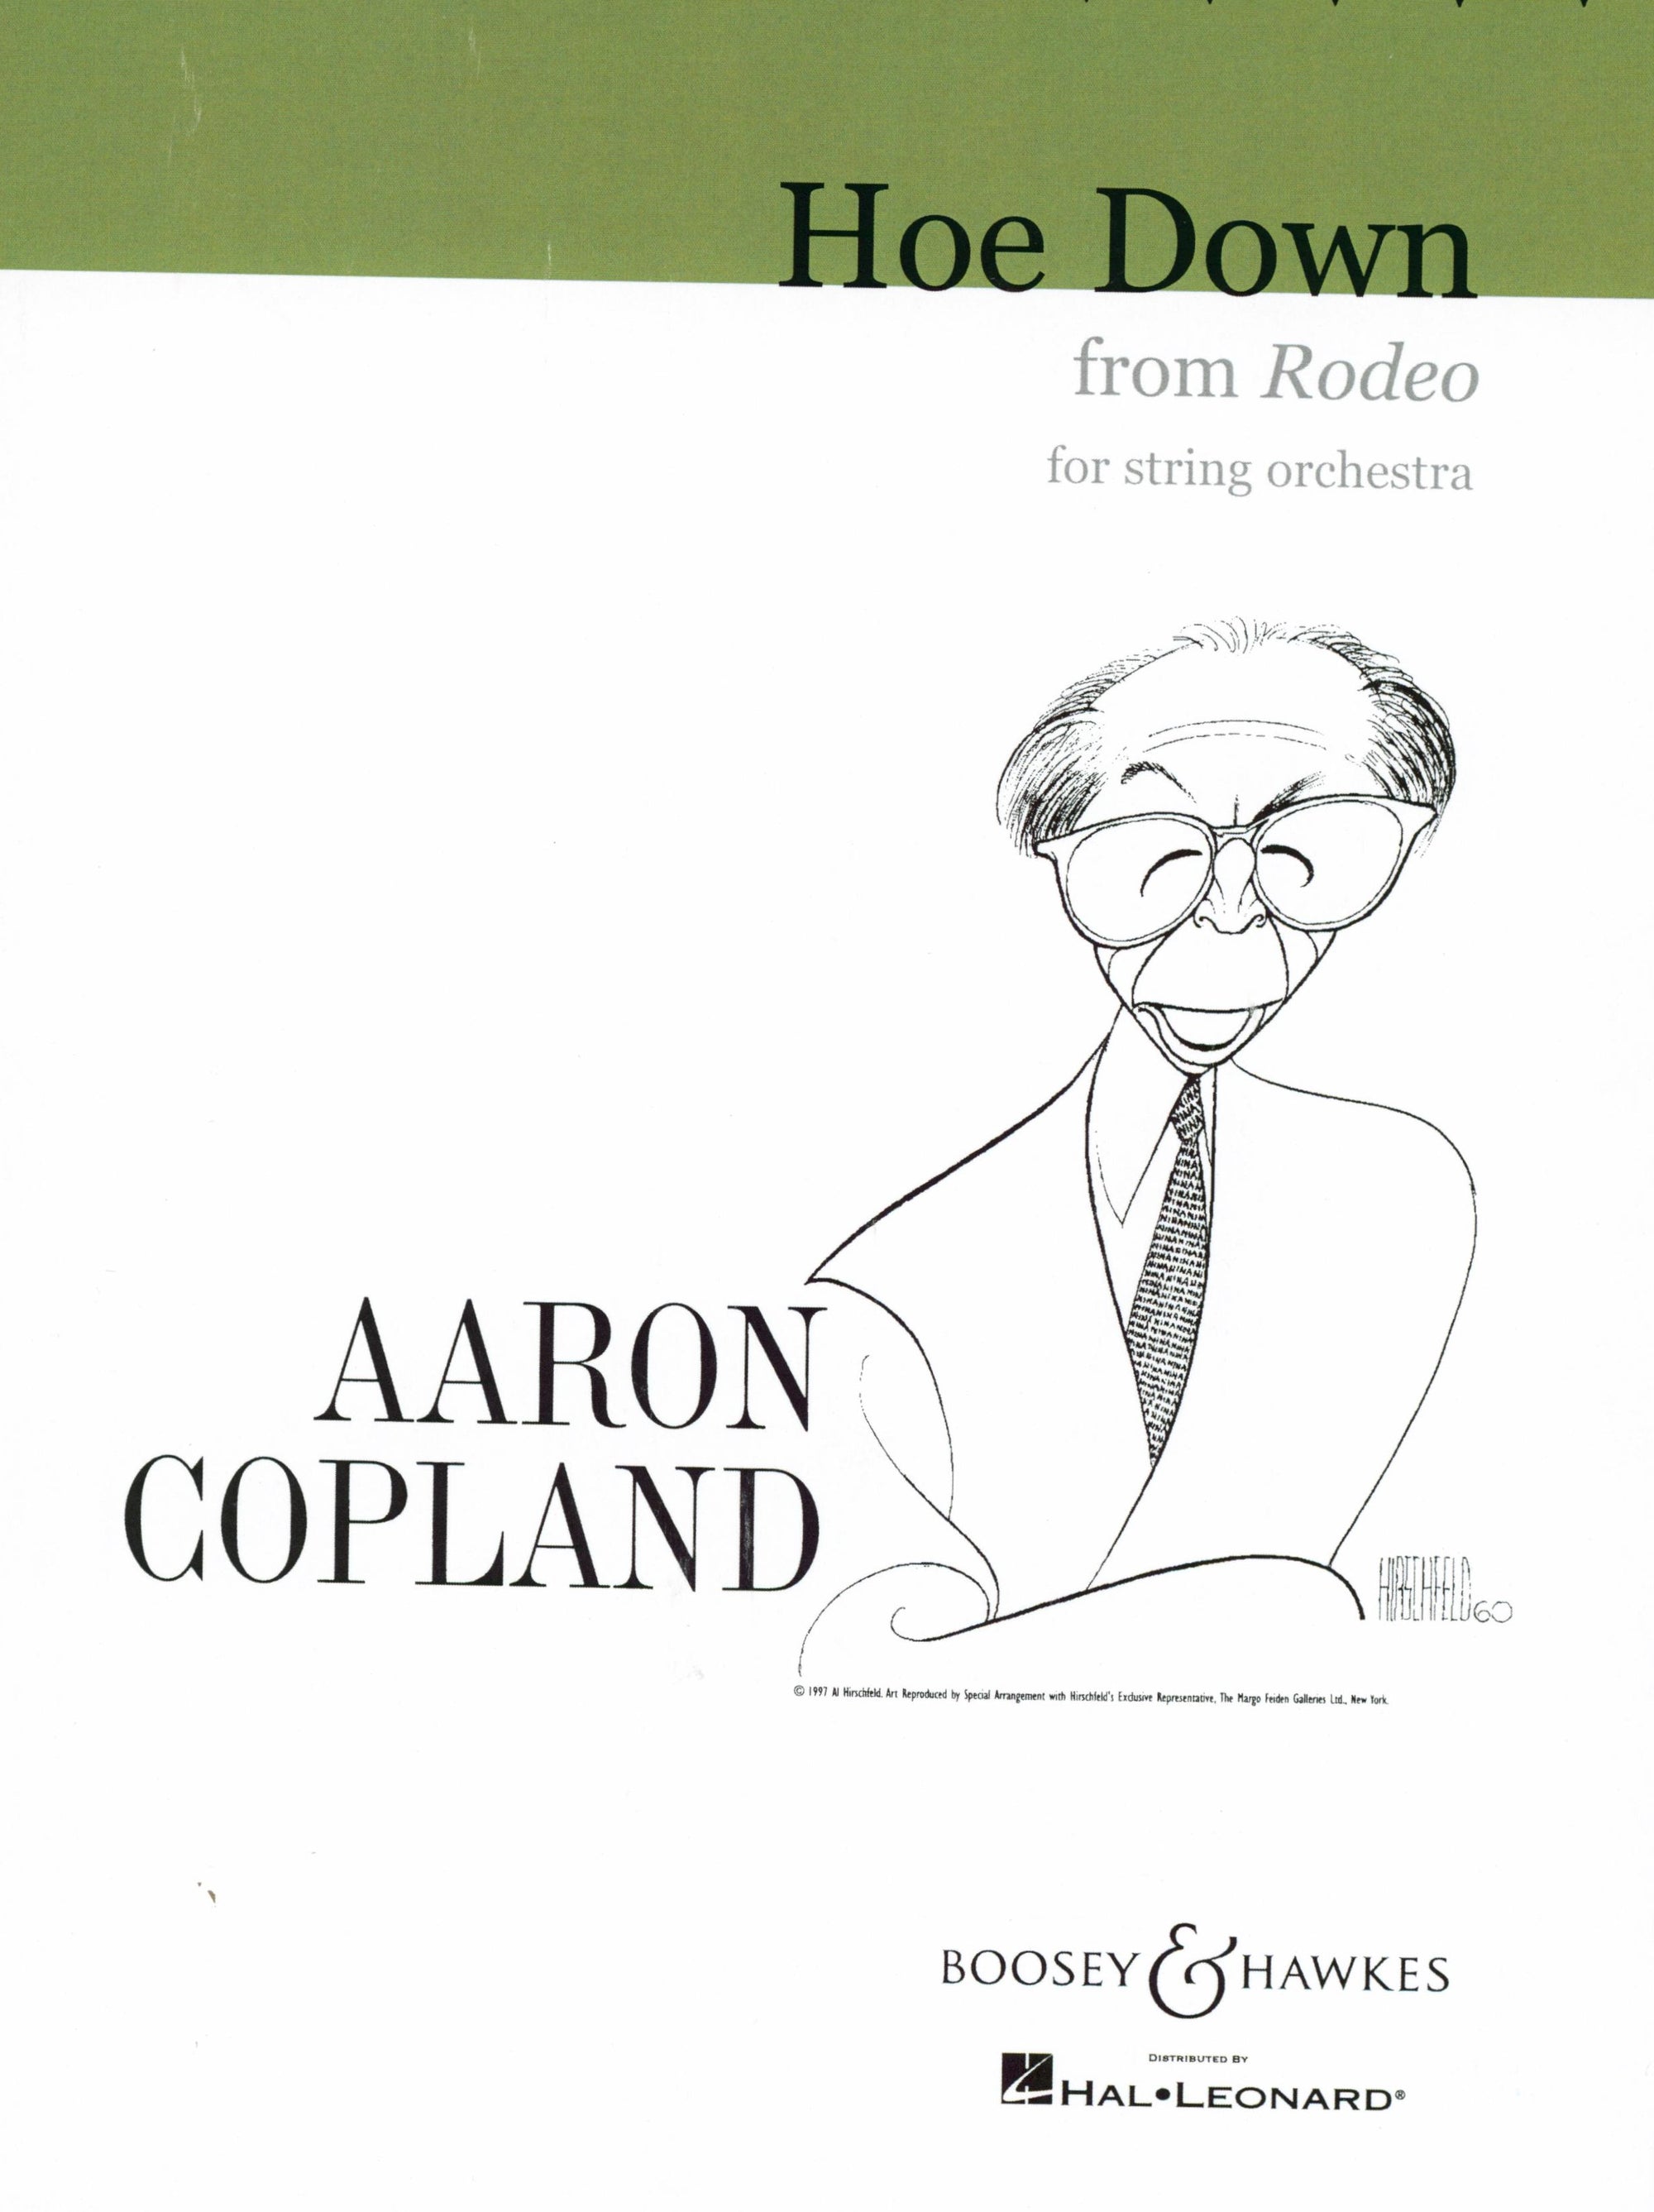 Copland: Hoe-Down from Rodeo (Version for String Orchestra)